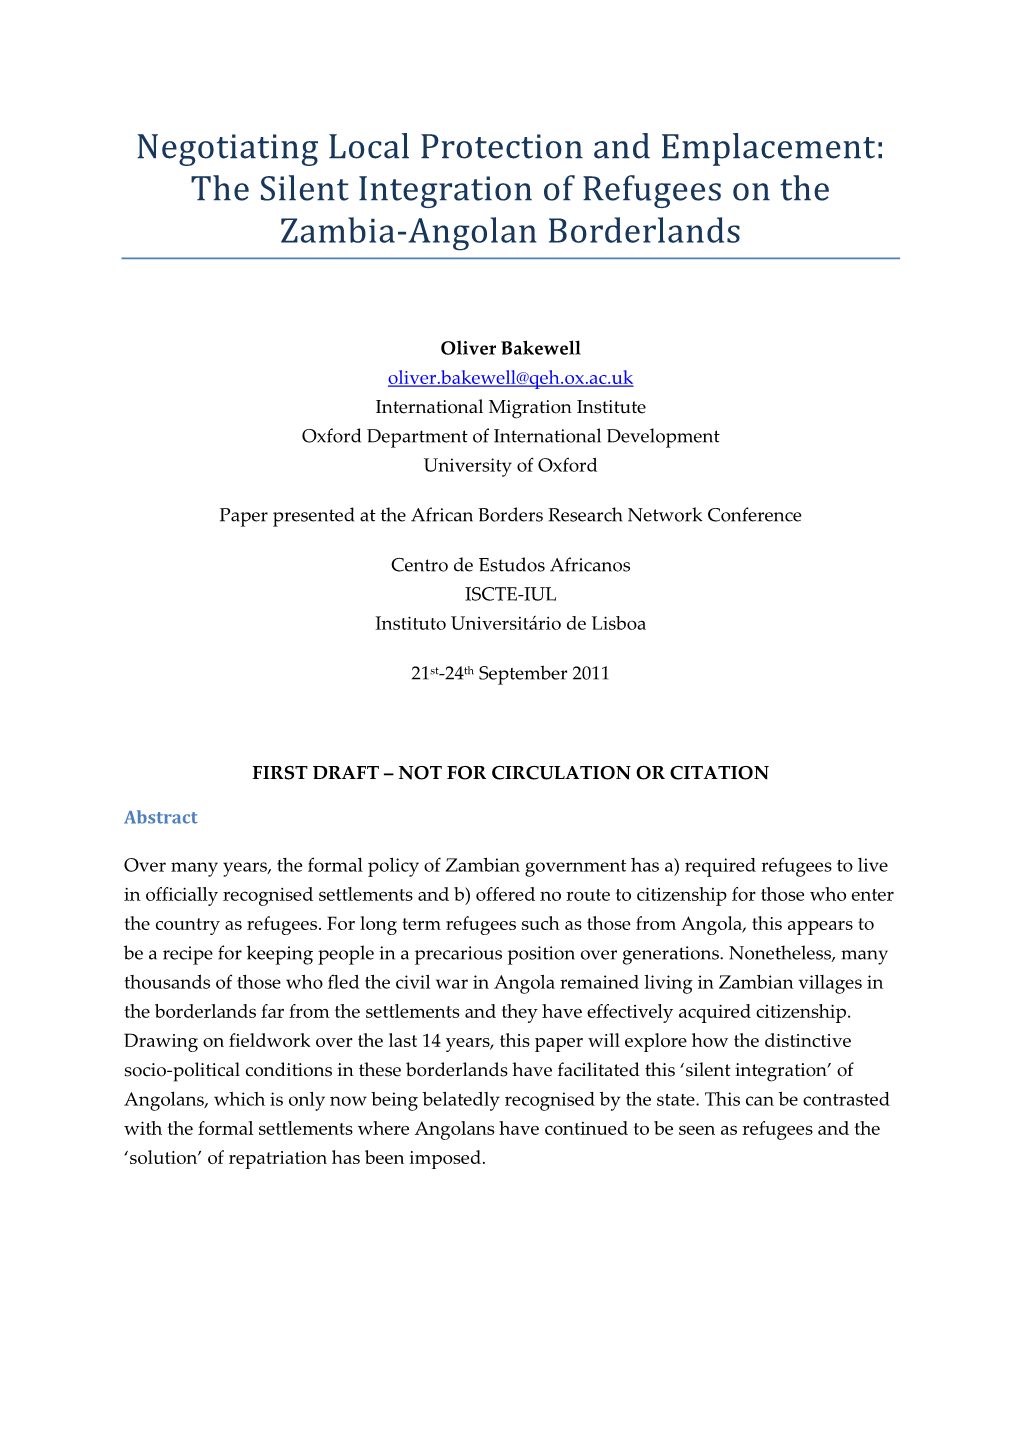 The Silent Integration of Refugees on the Zambia-Angolan Borderlands